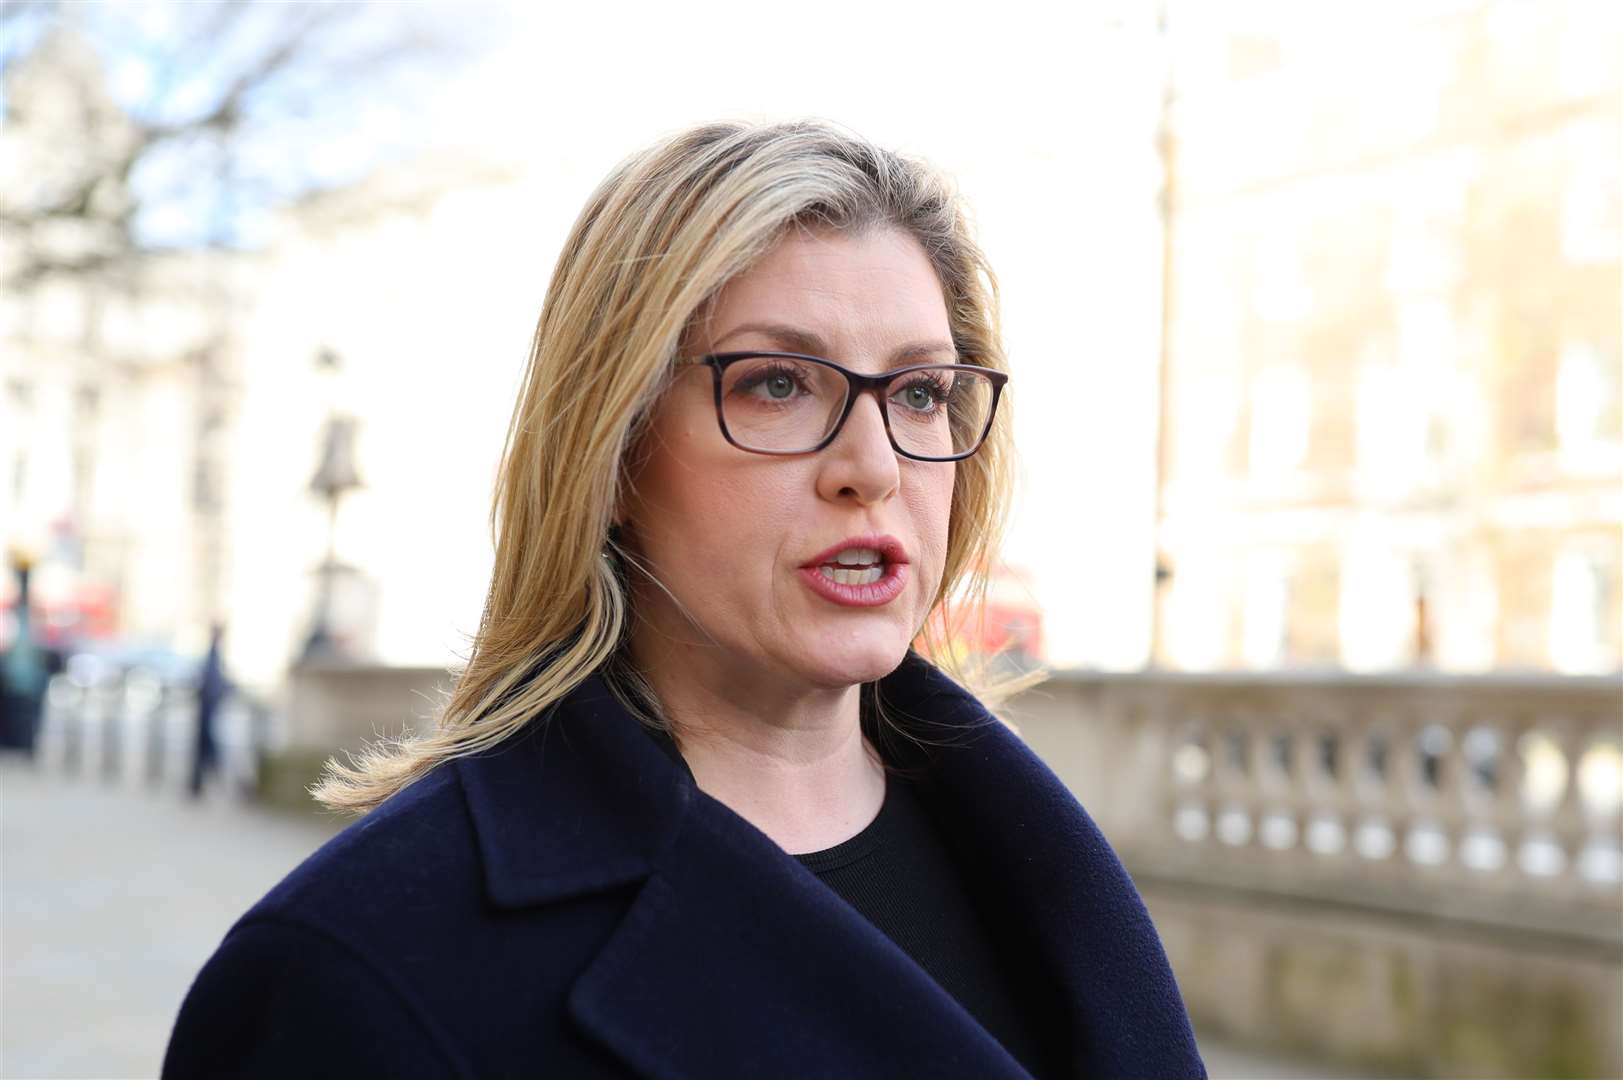 Penny Mordaunt backed Brexit in 2016 (Aaron Chown/PA)